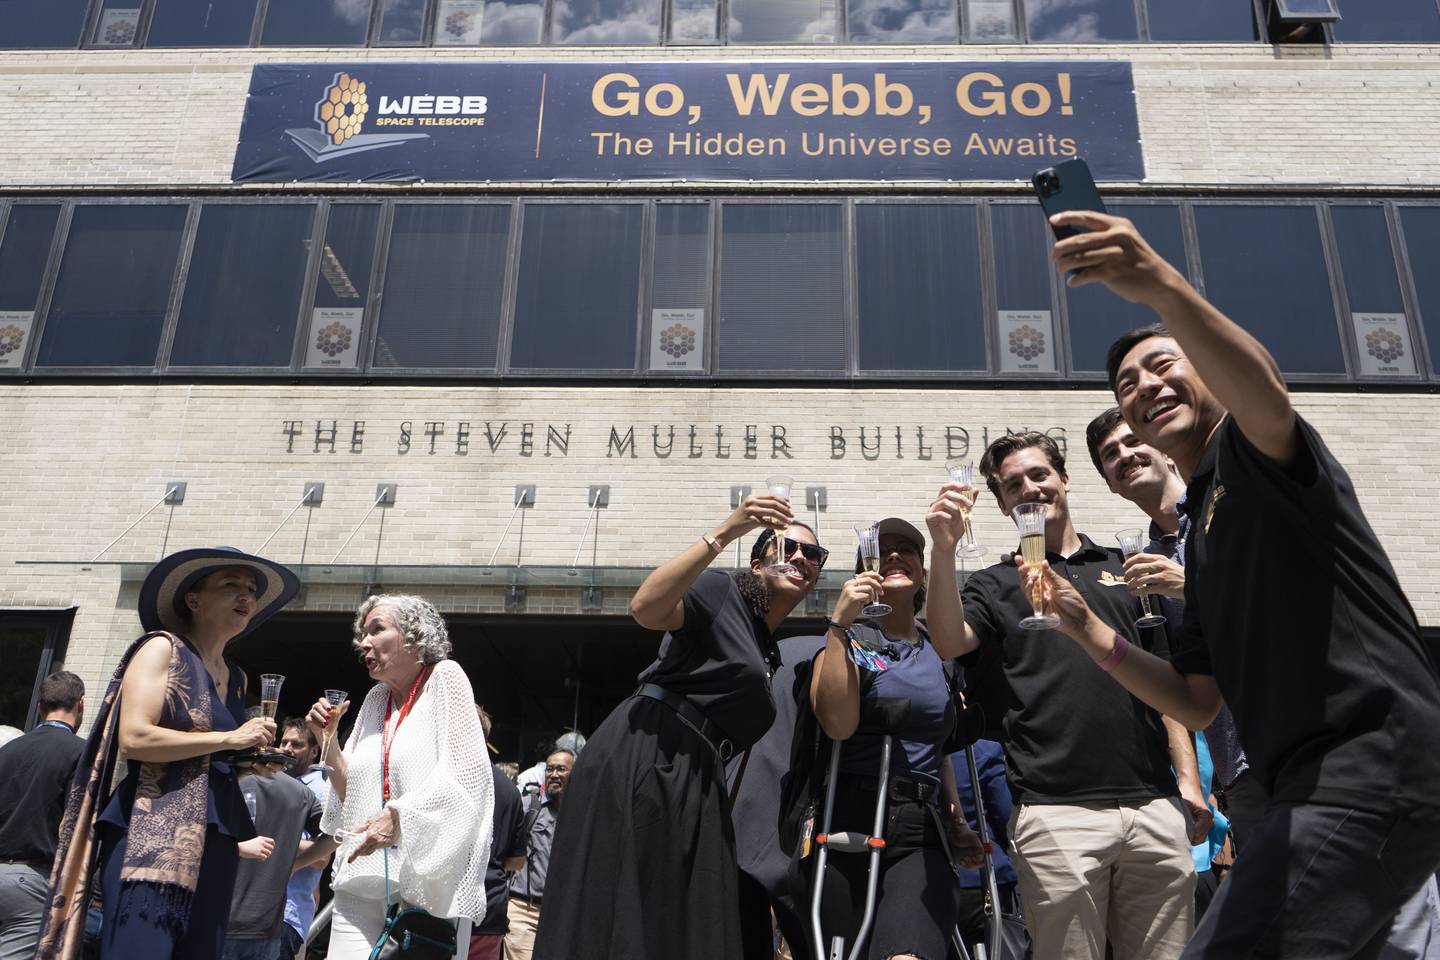 Attendees take a selfie with the banner outside of the Steven Muller Building at the James Webb Space Telescope Science Launch.